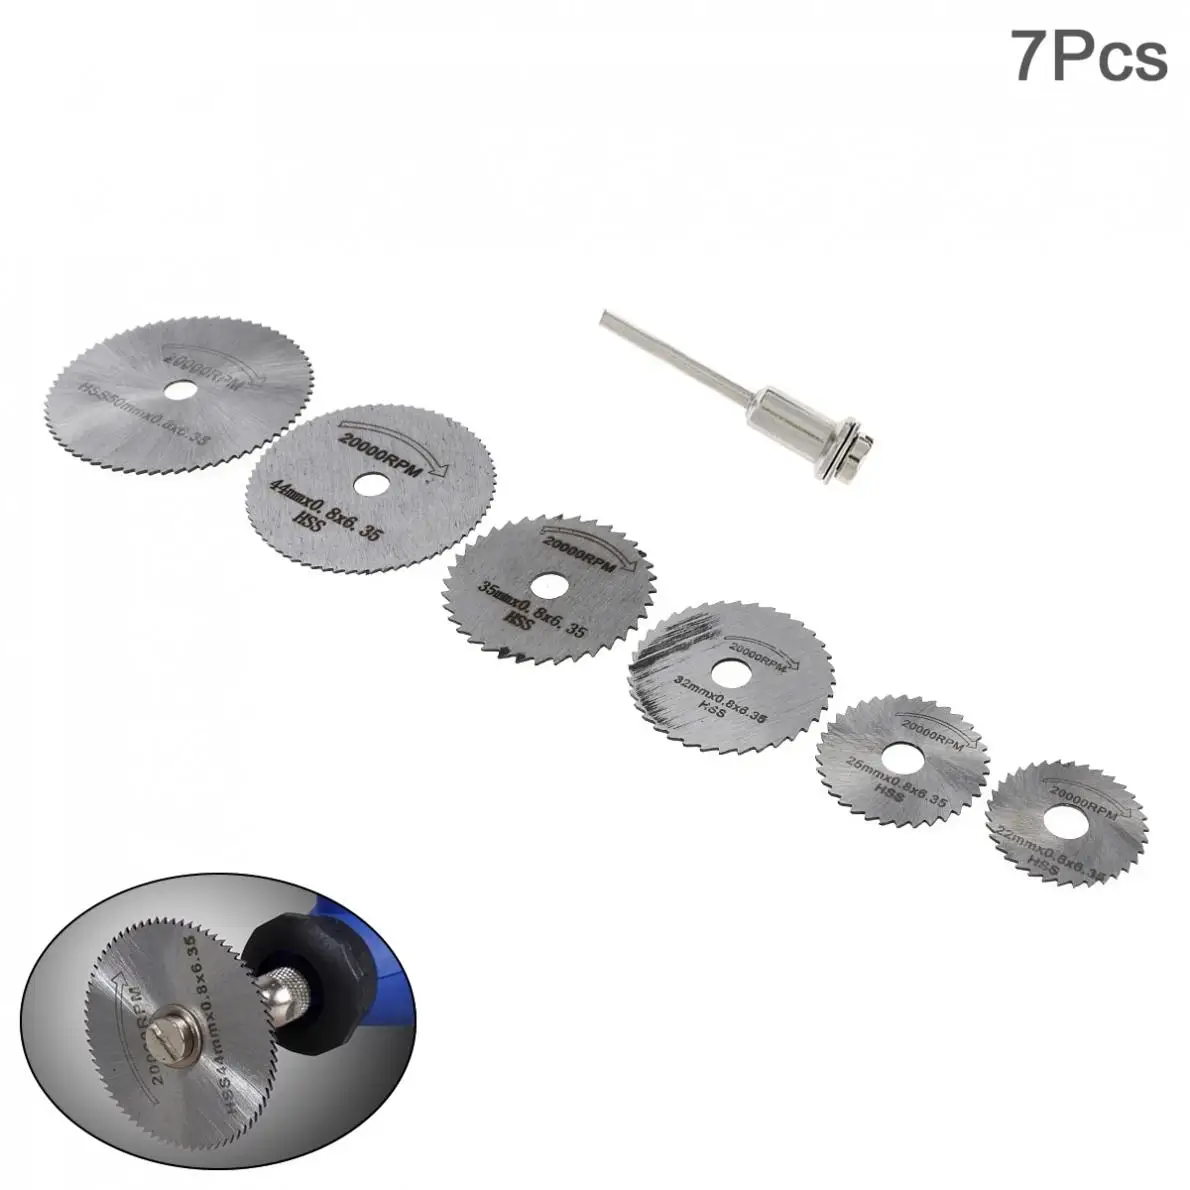 7pcs/lot Mini Wood Saw Blade Circular Blade Jig Saw Rotary Tool for Cutter Power Tool Set Wood Cutting Discs 775 24v 8000rpm mini table saw for 4 100mm saw blade spindle cutting saws machine pulley bench electric tool wood chain